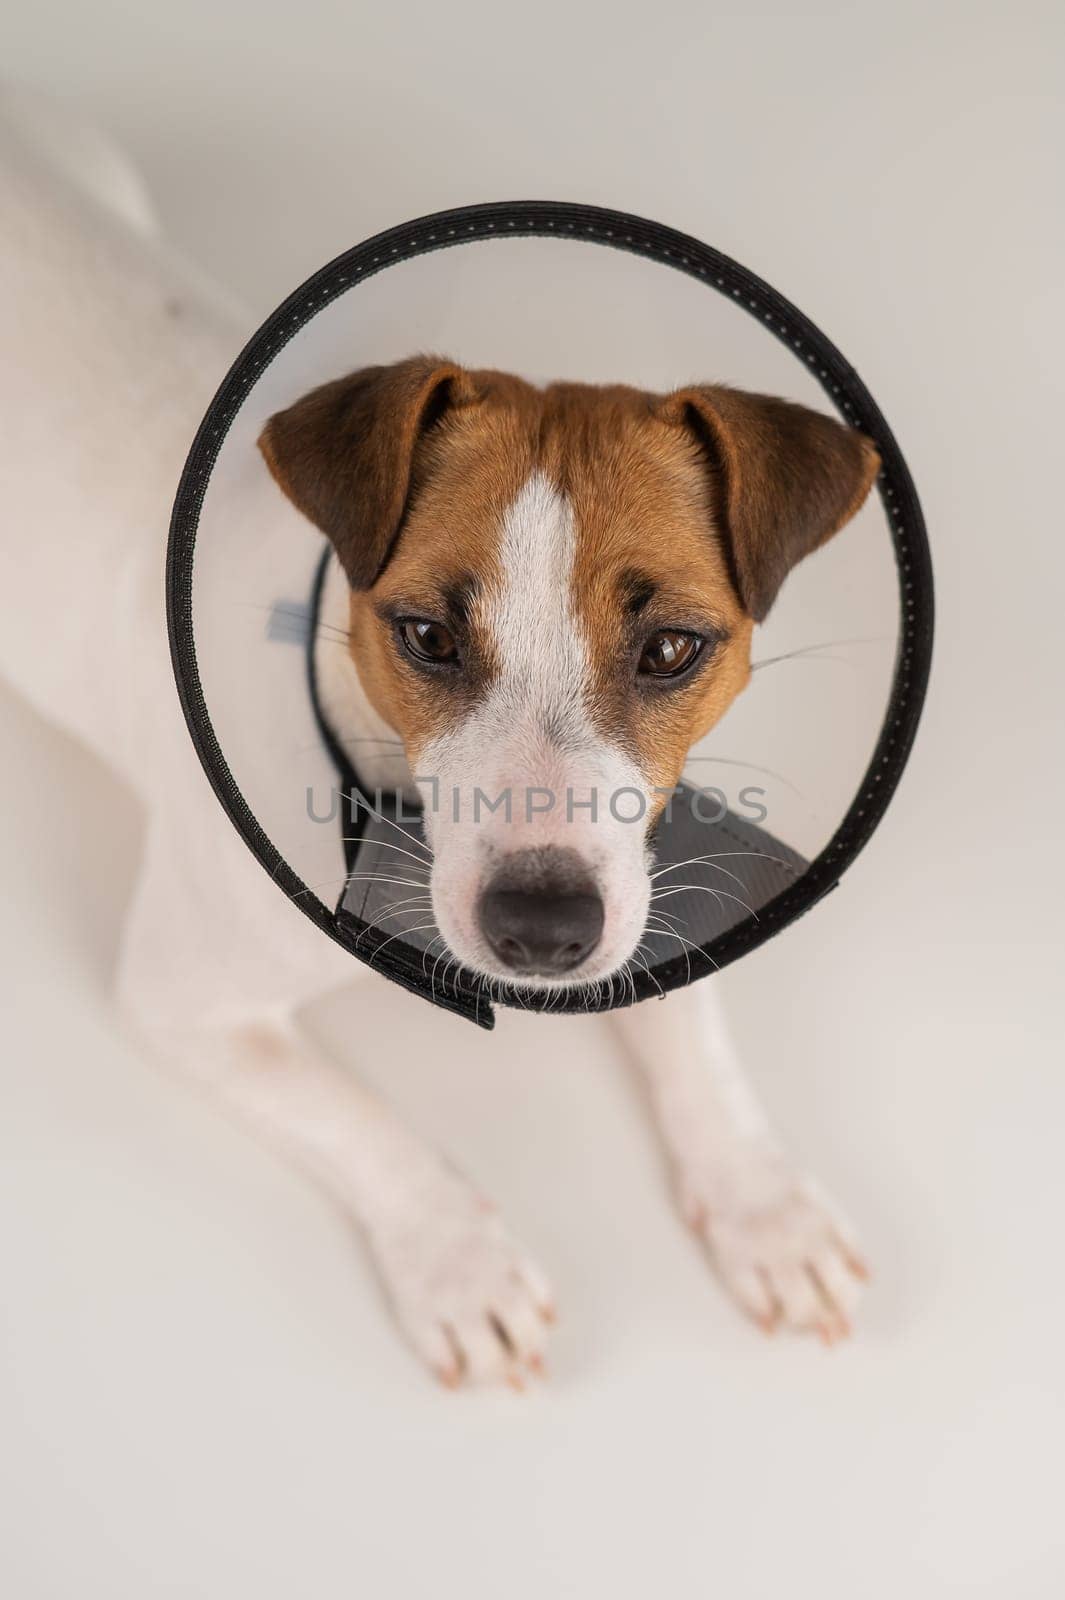 Jack Russell Terrier dog in plastic cone after surgery. by mrwed54